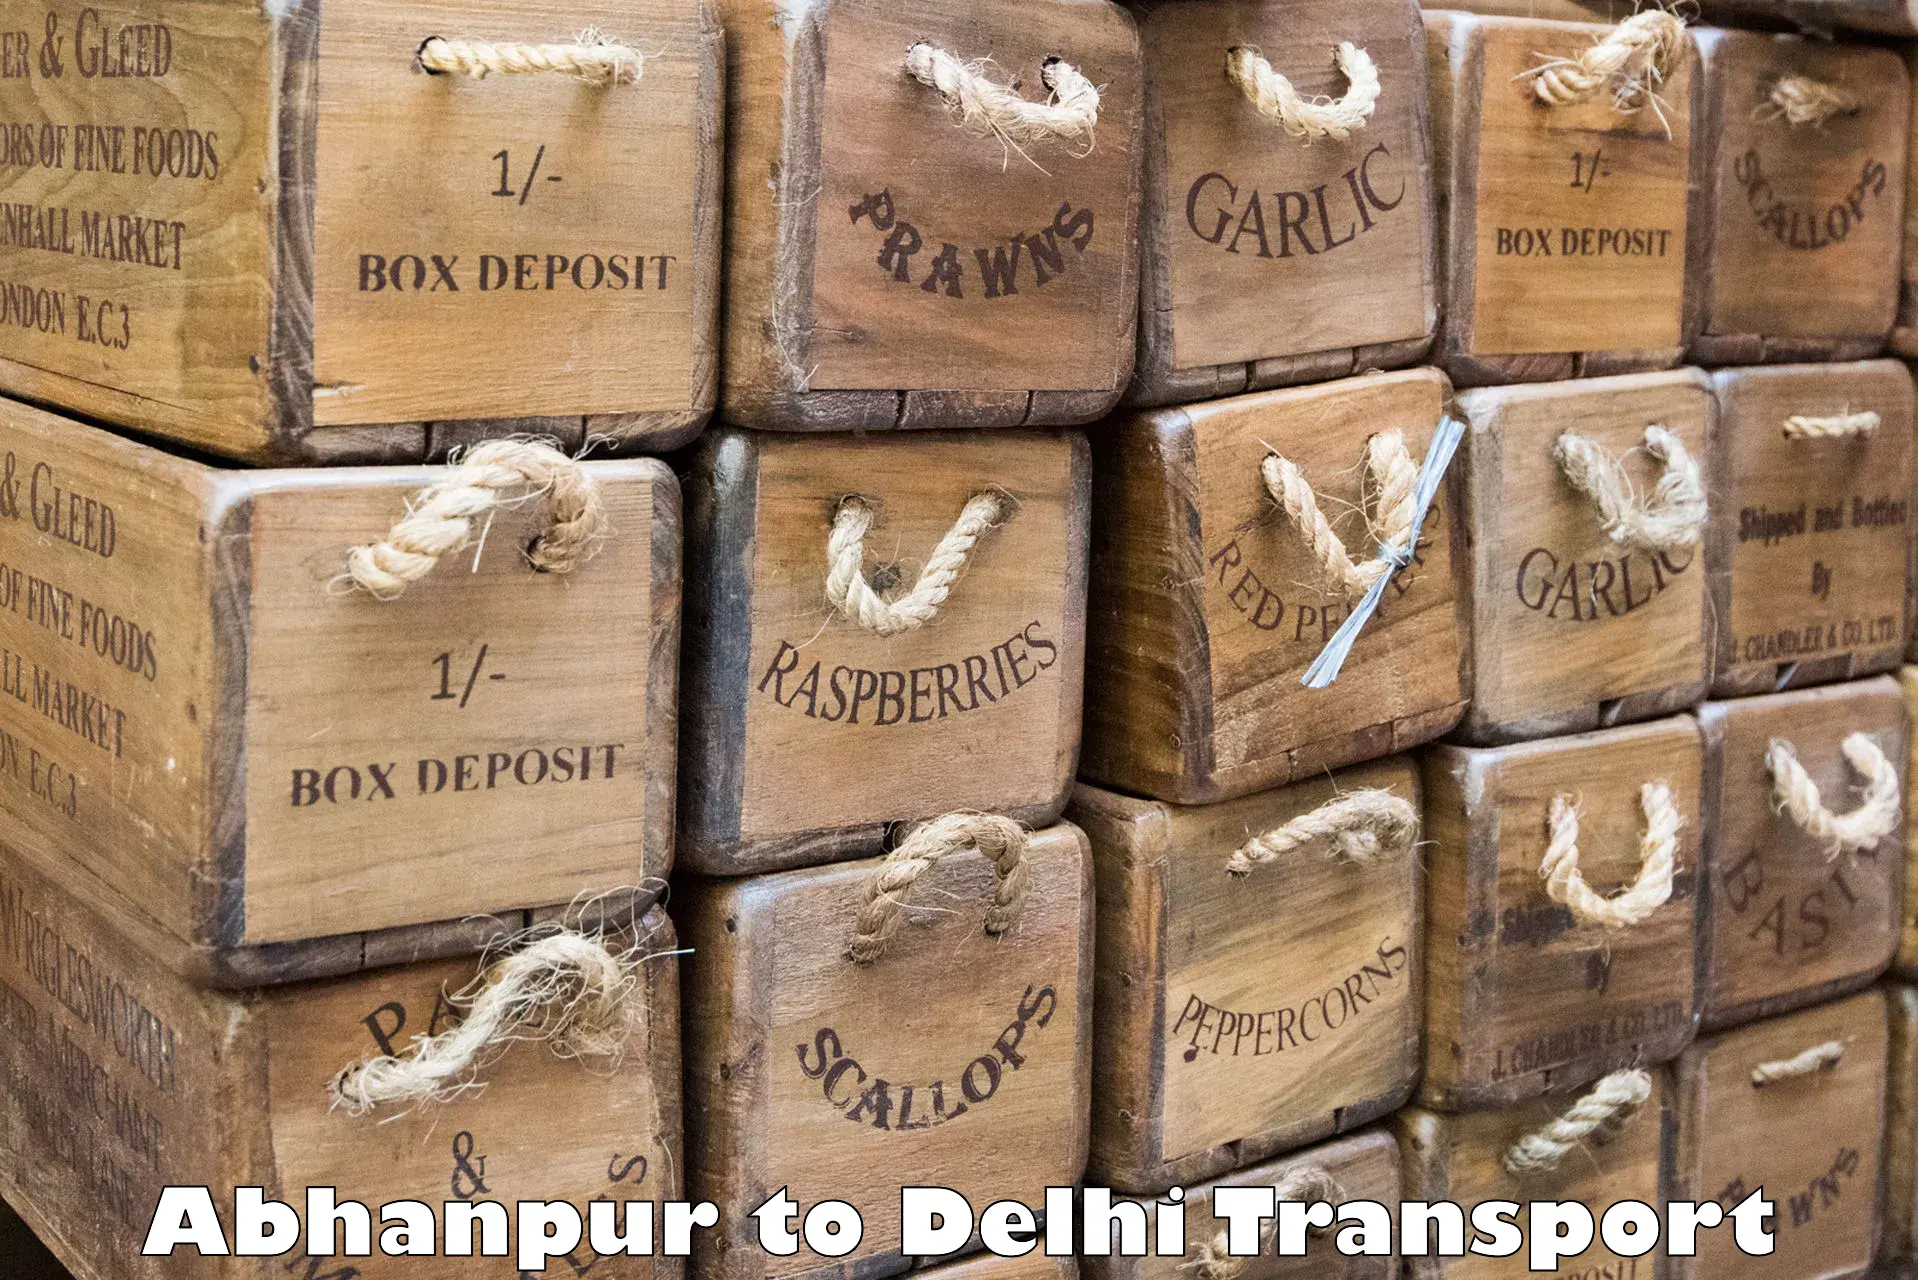 Container transport service Abhanpur to Indraprastha